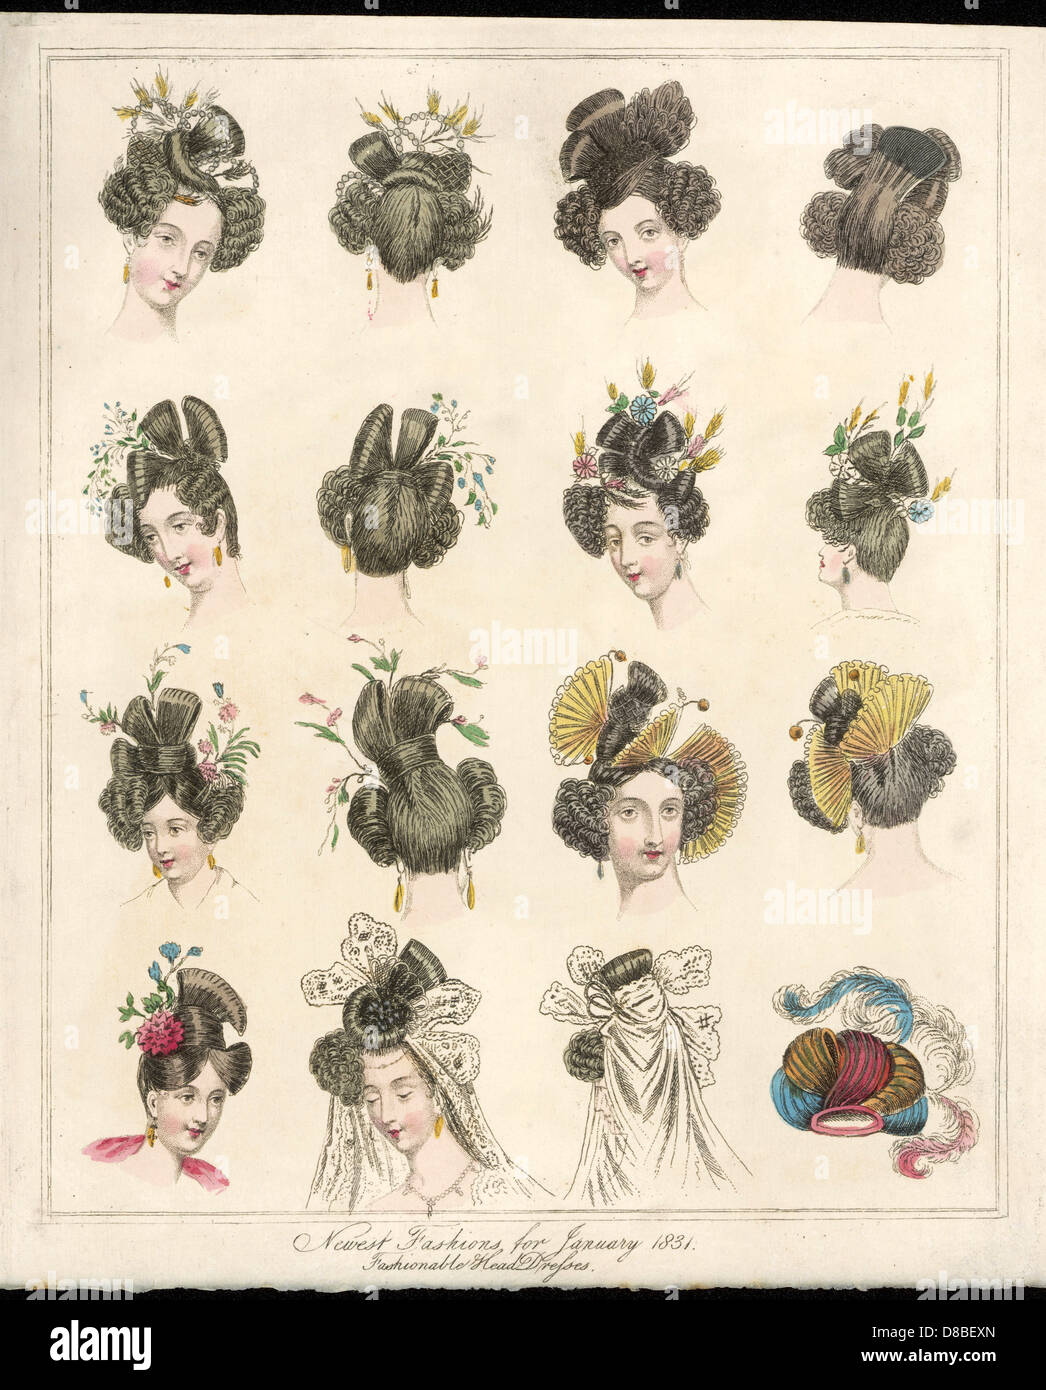 HAIR STYLES FOR 1831 Stock Photo